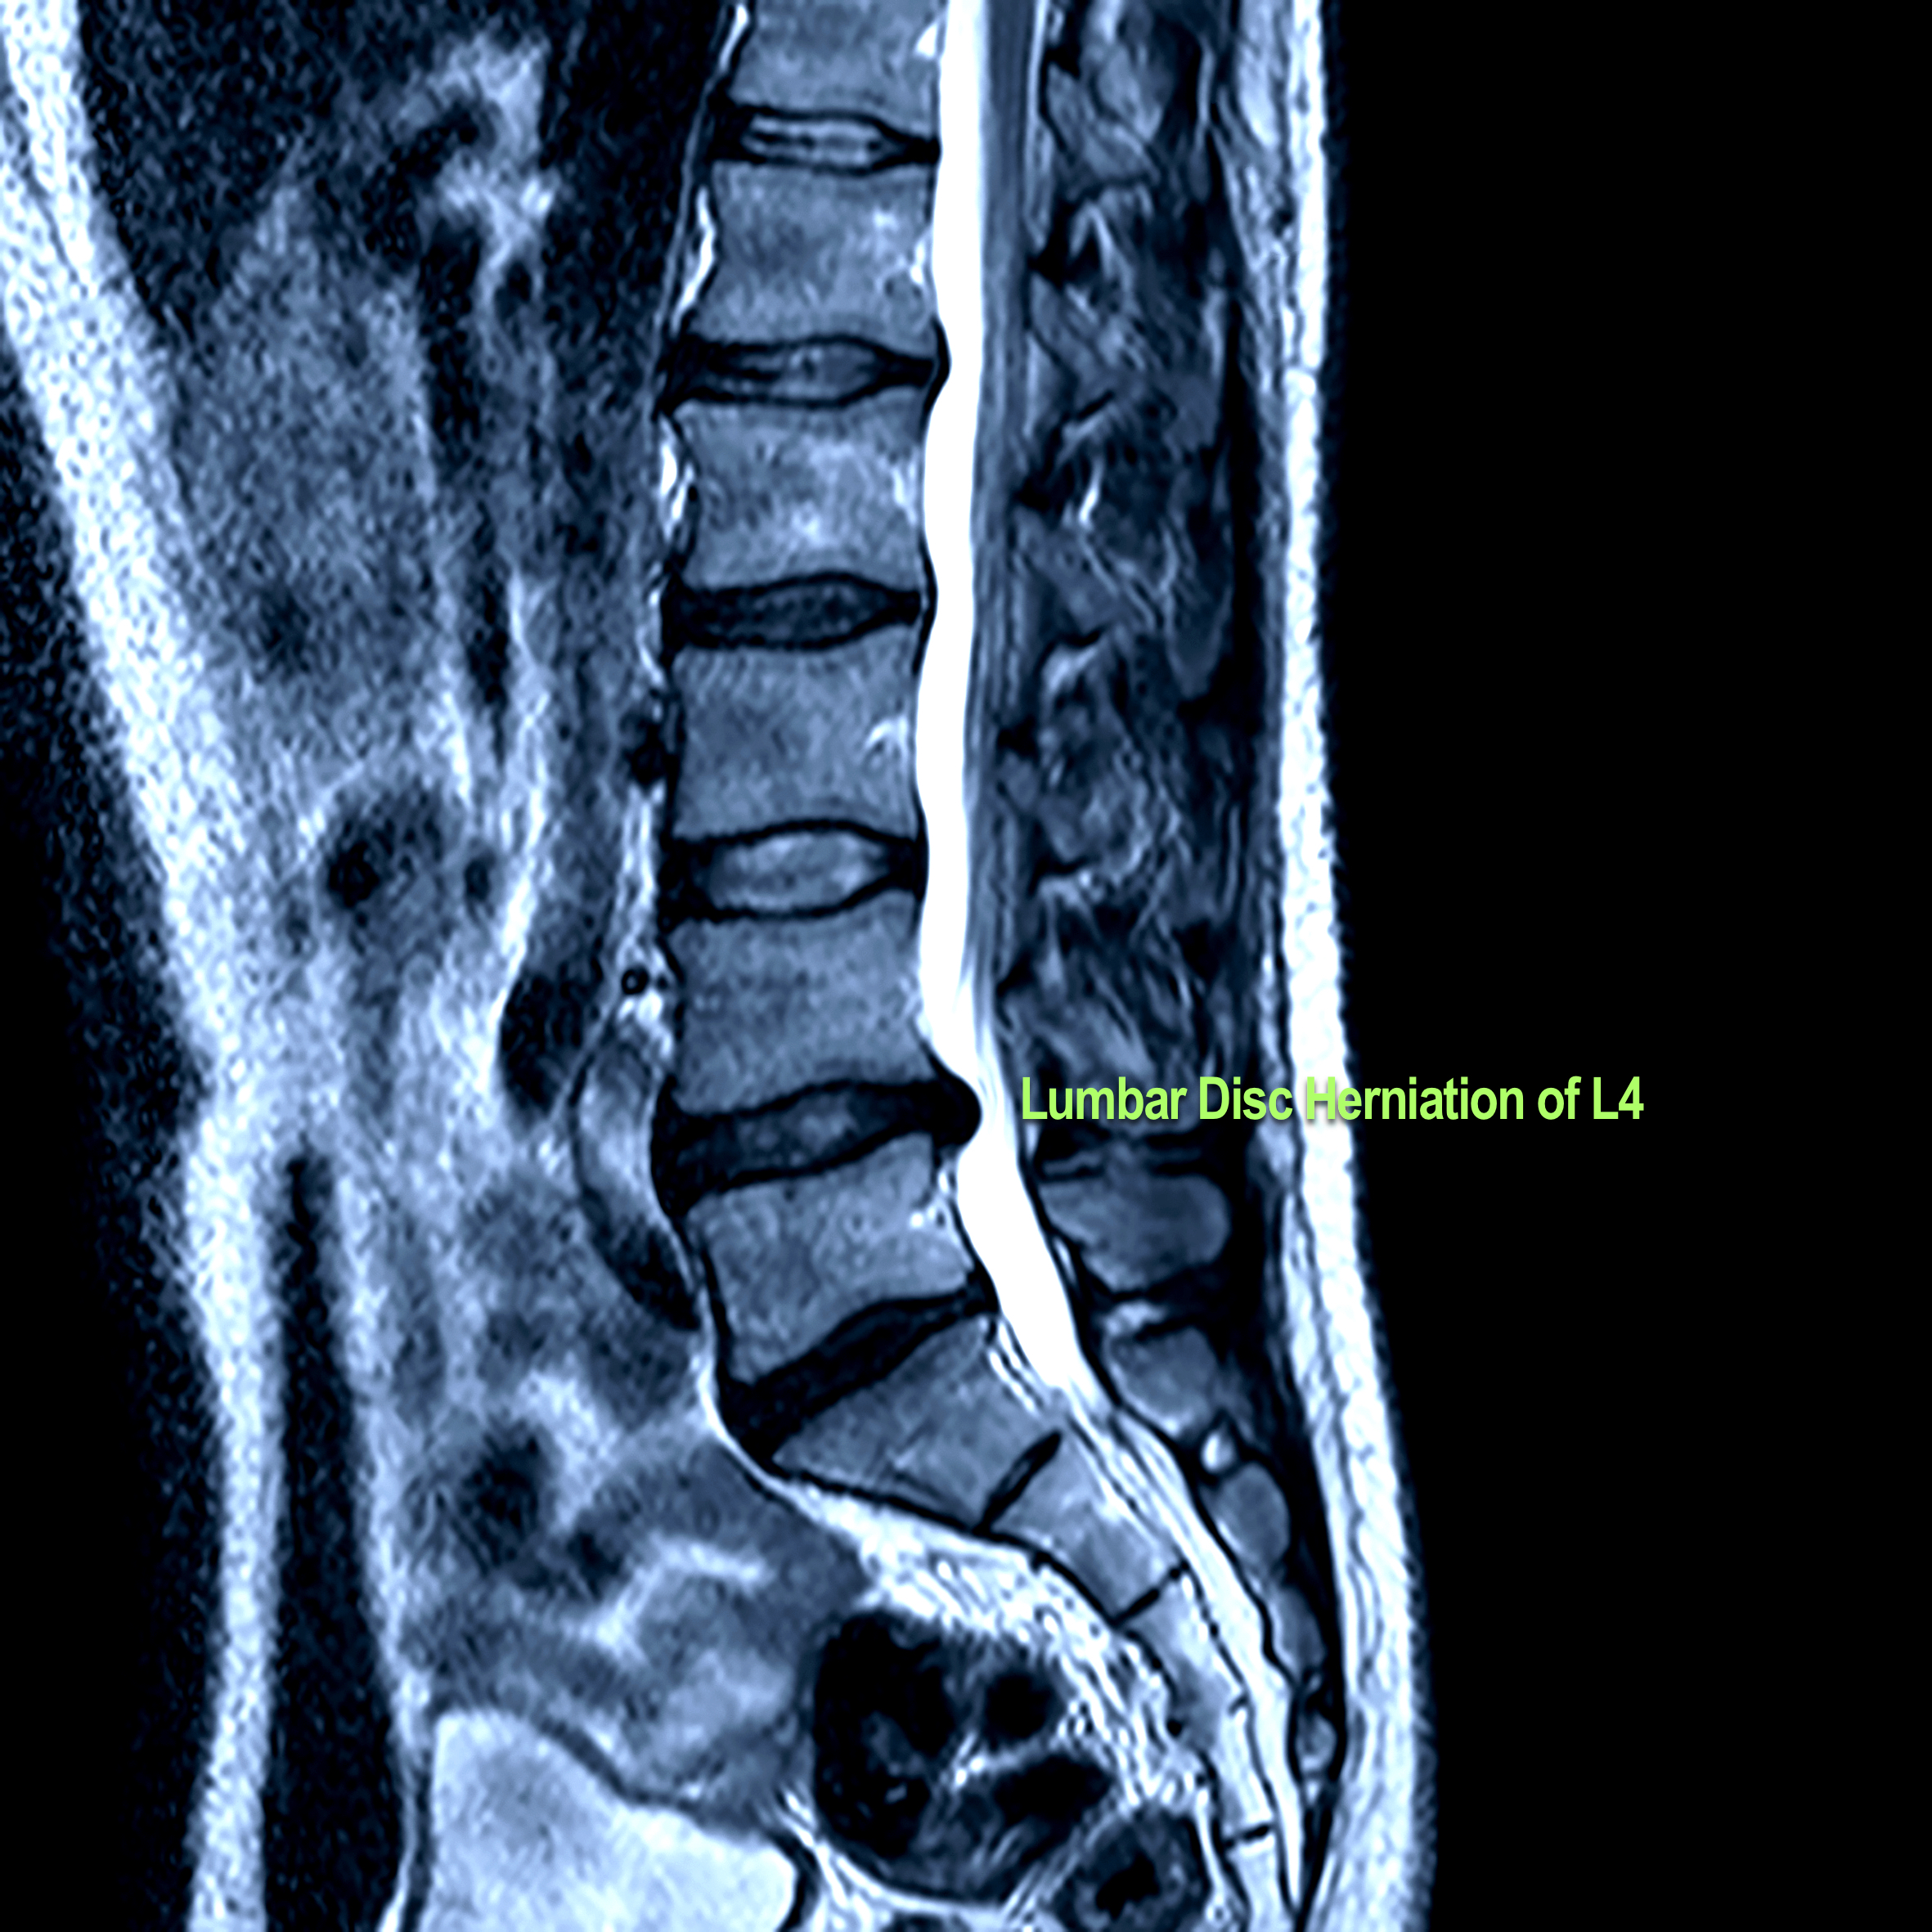 magnetic resonance image - vertebrae of spine with one herniated disc that presses on the spinal cord